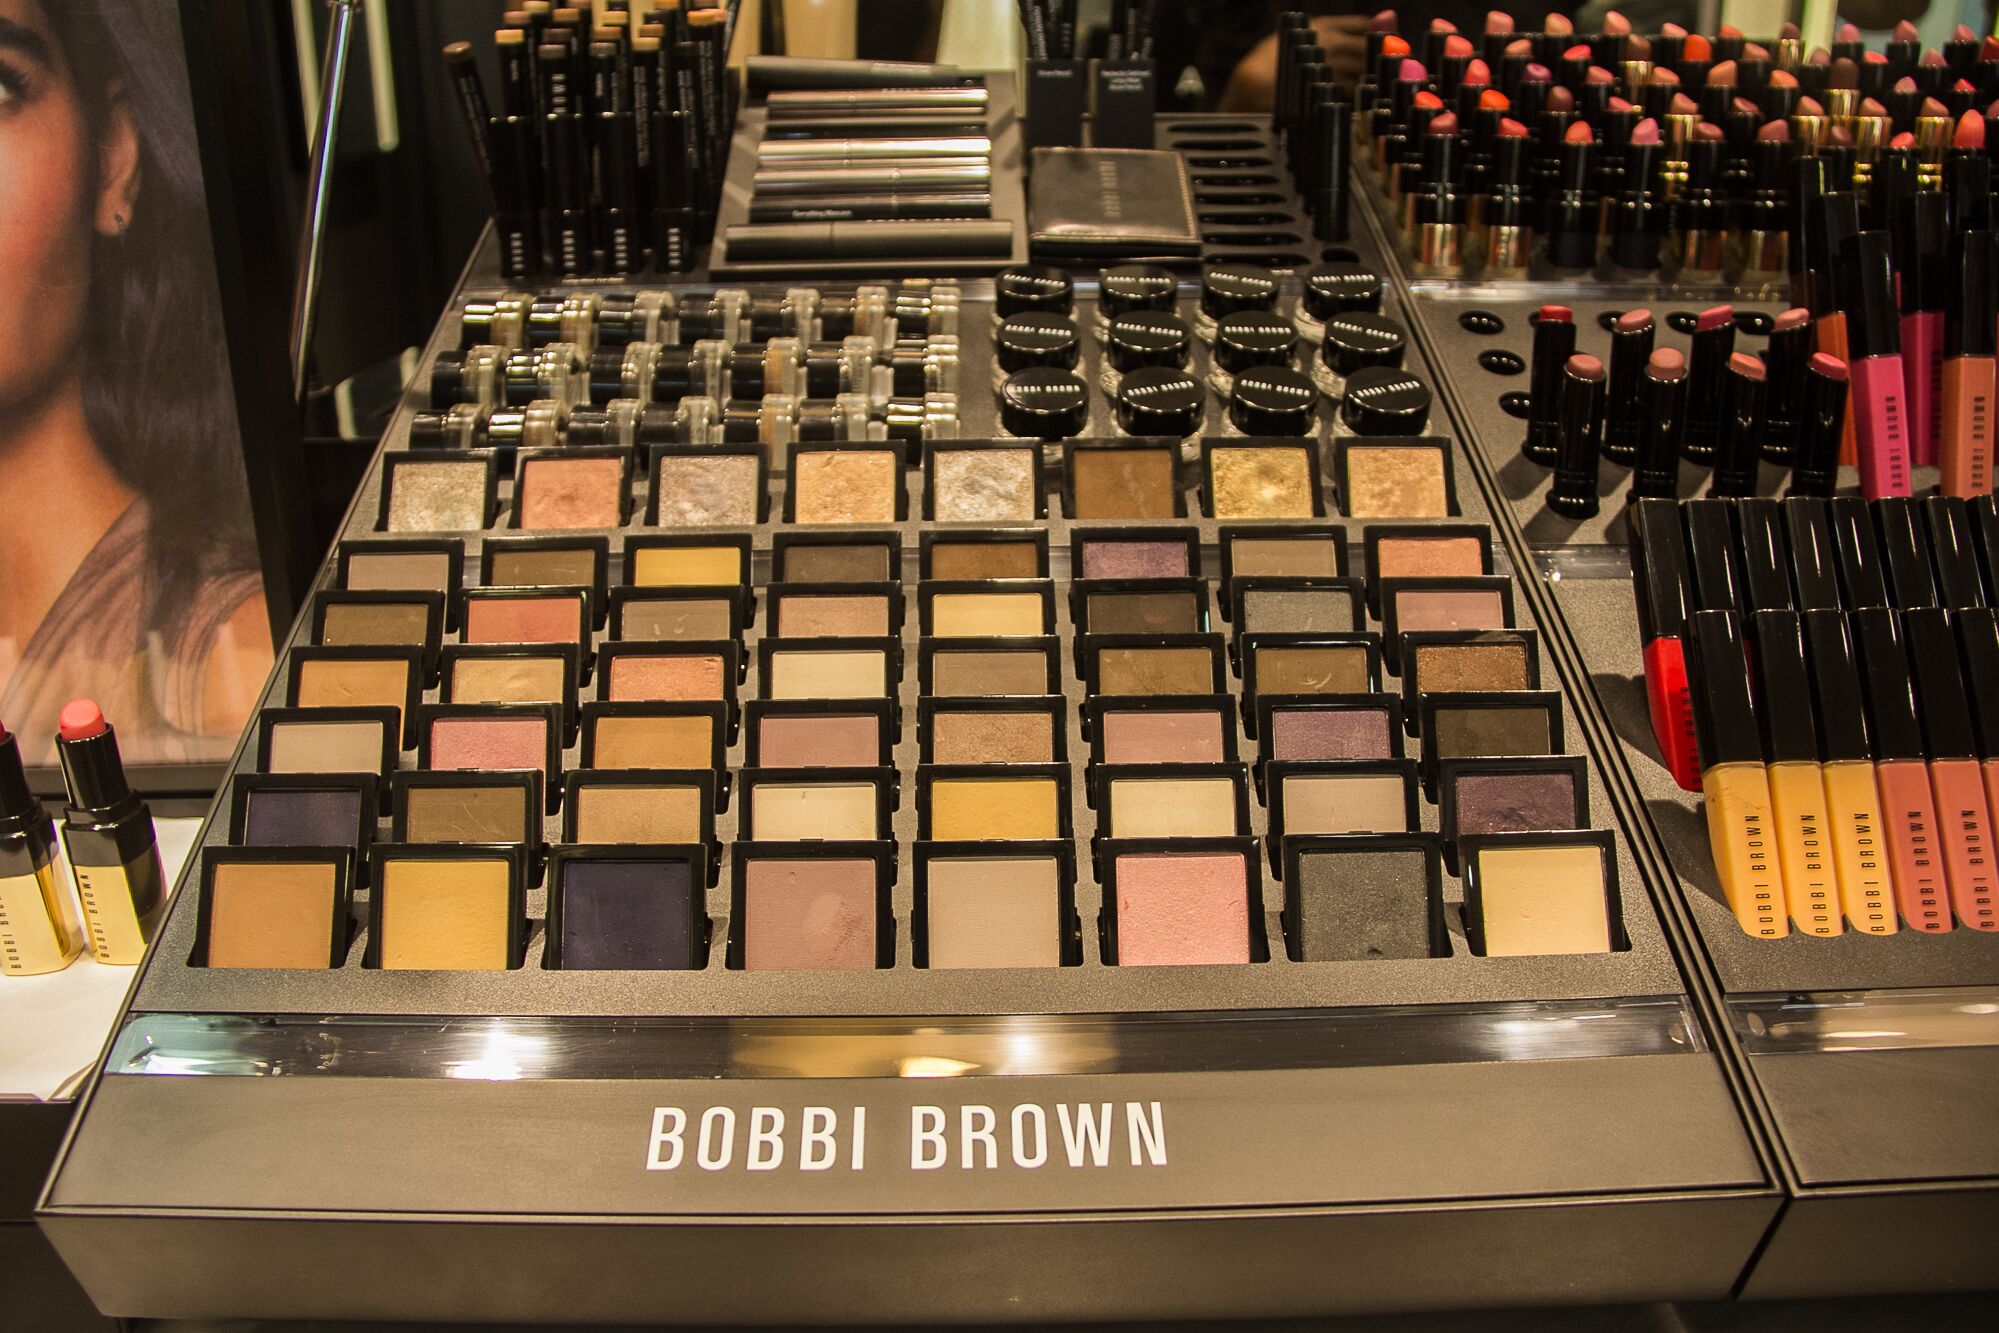  BOBBI BROWN LAUNCHES IN ABUJA: THE INTERNATIONAL BEAUTY HOUSE MAKES ITS WAY TO NIGERIA